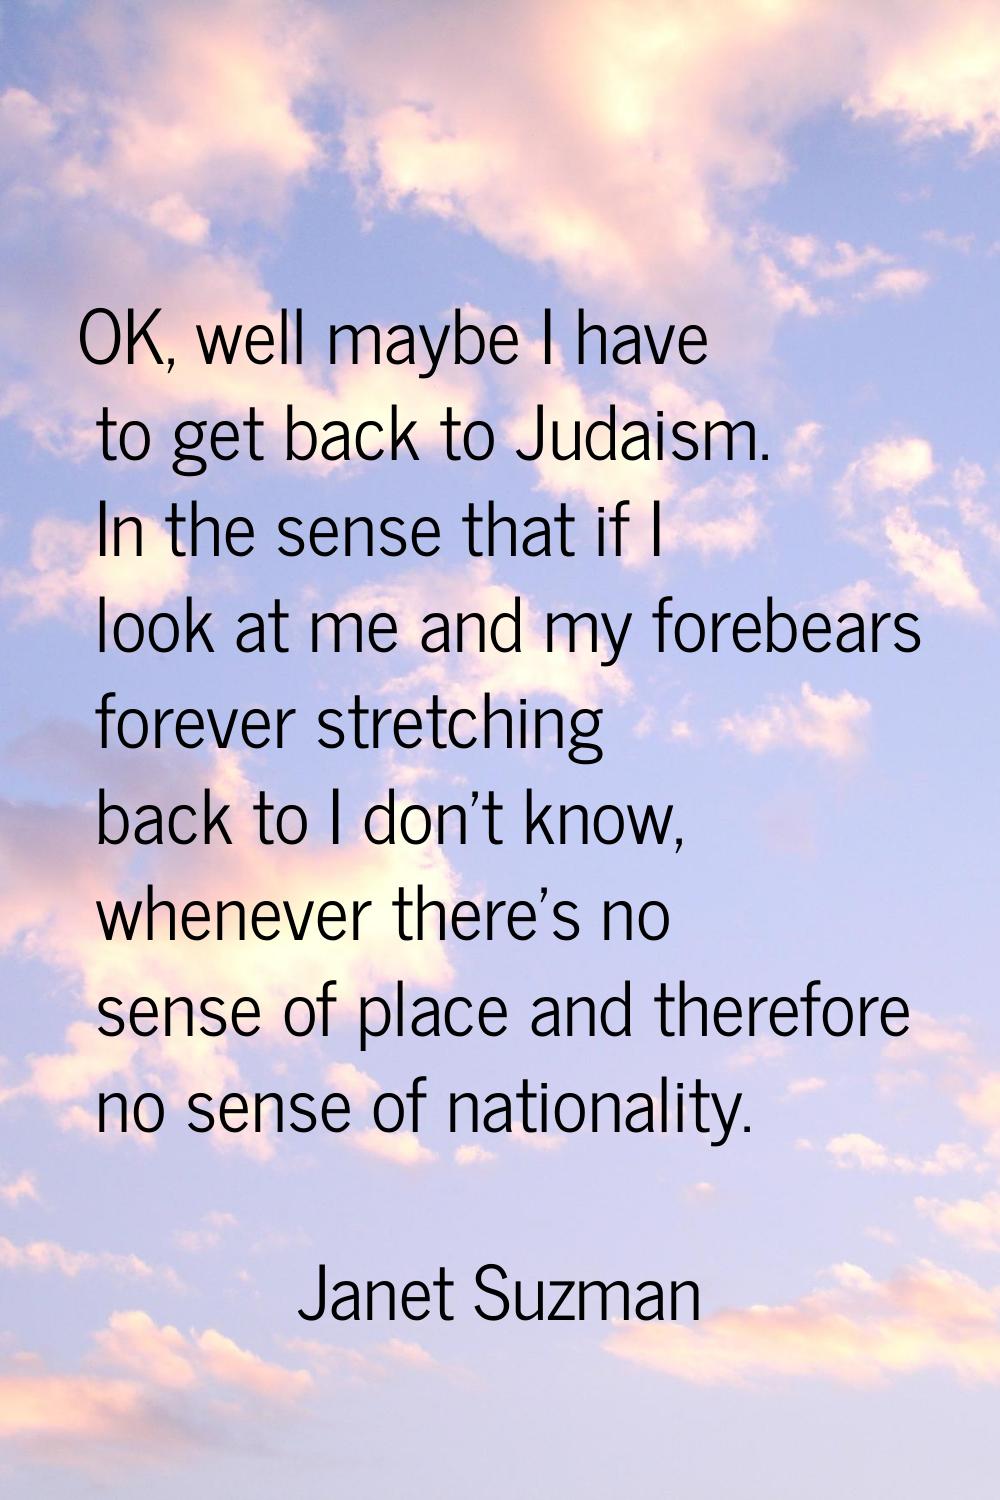 OK, well maybe I have to get back to Judaism. In the sense that if I look at me and my forebears fo